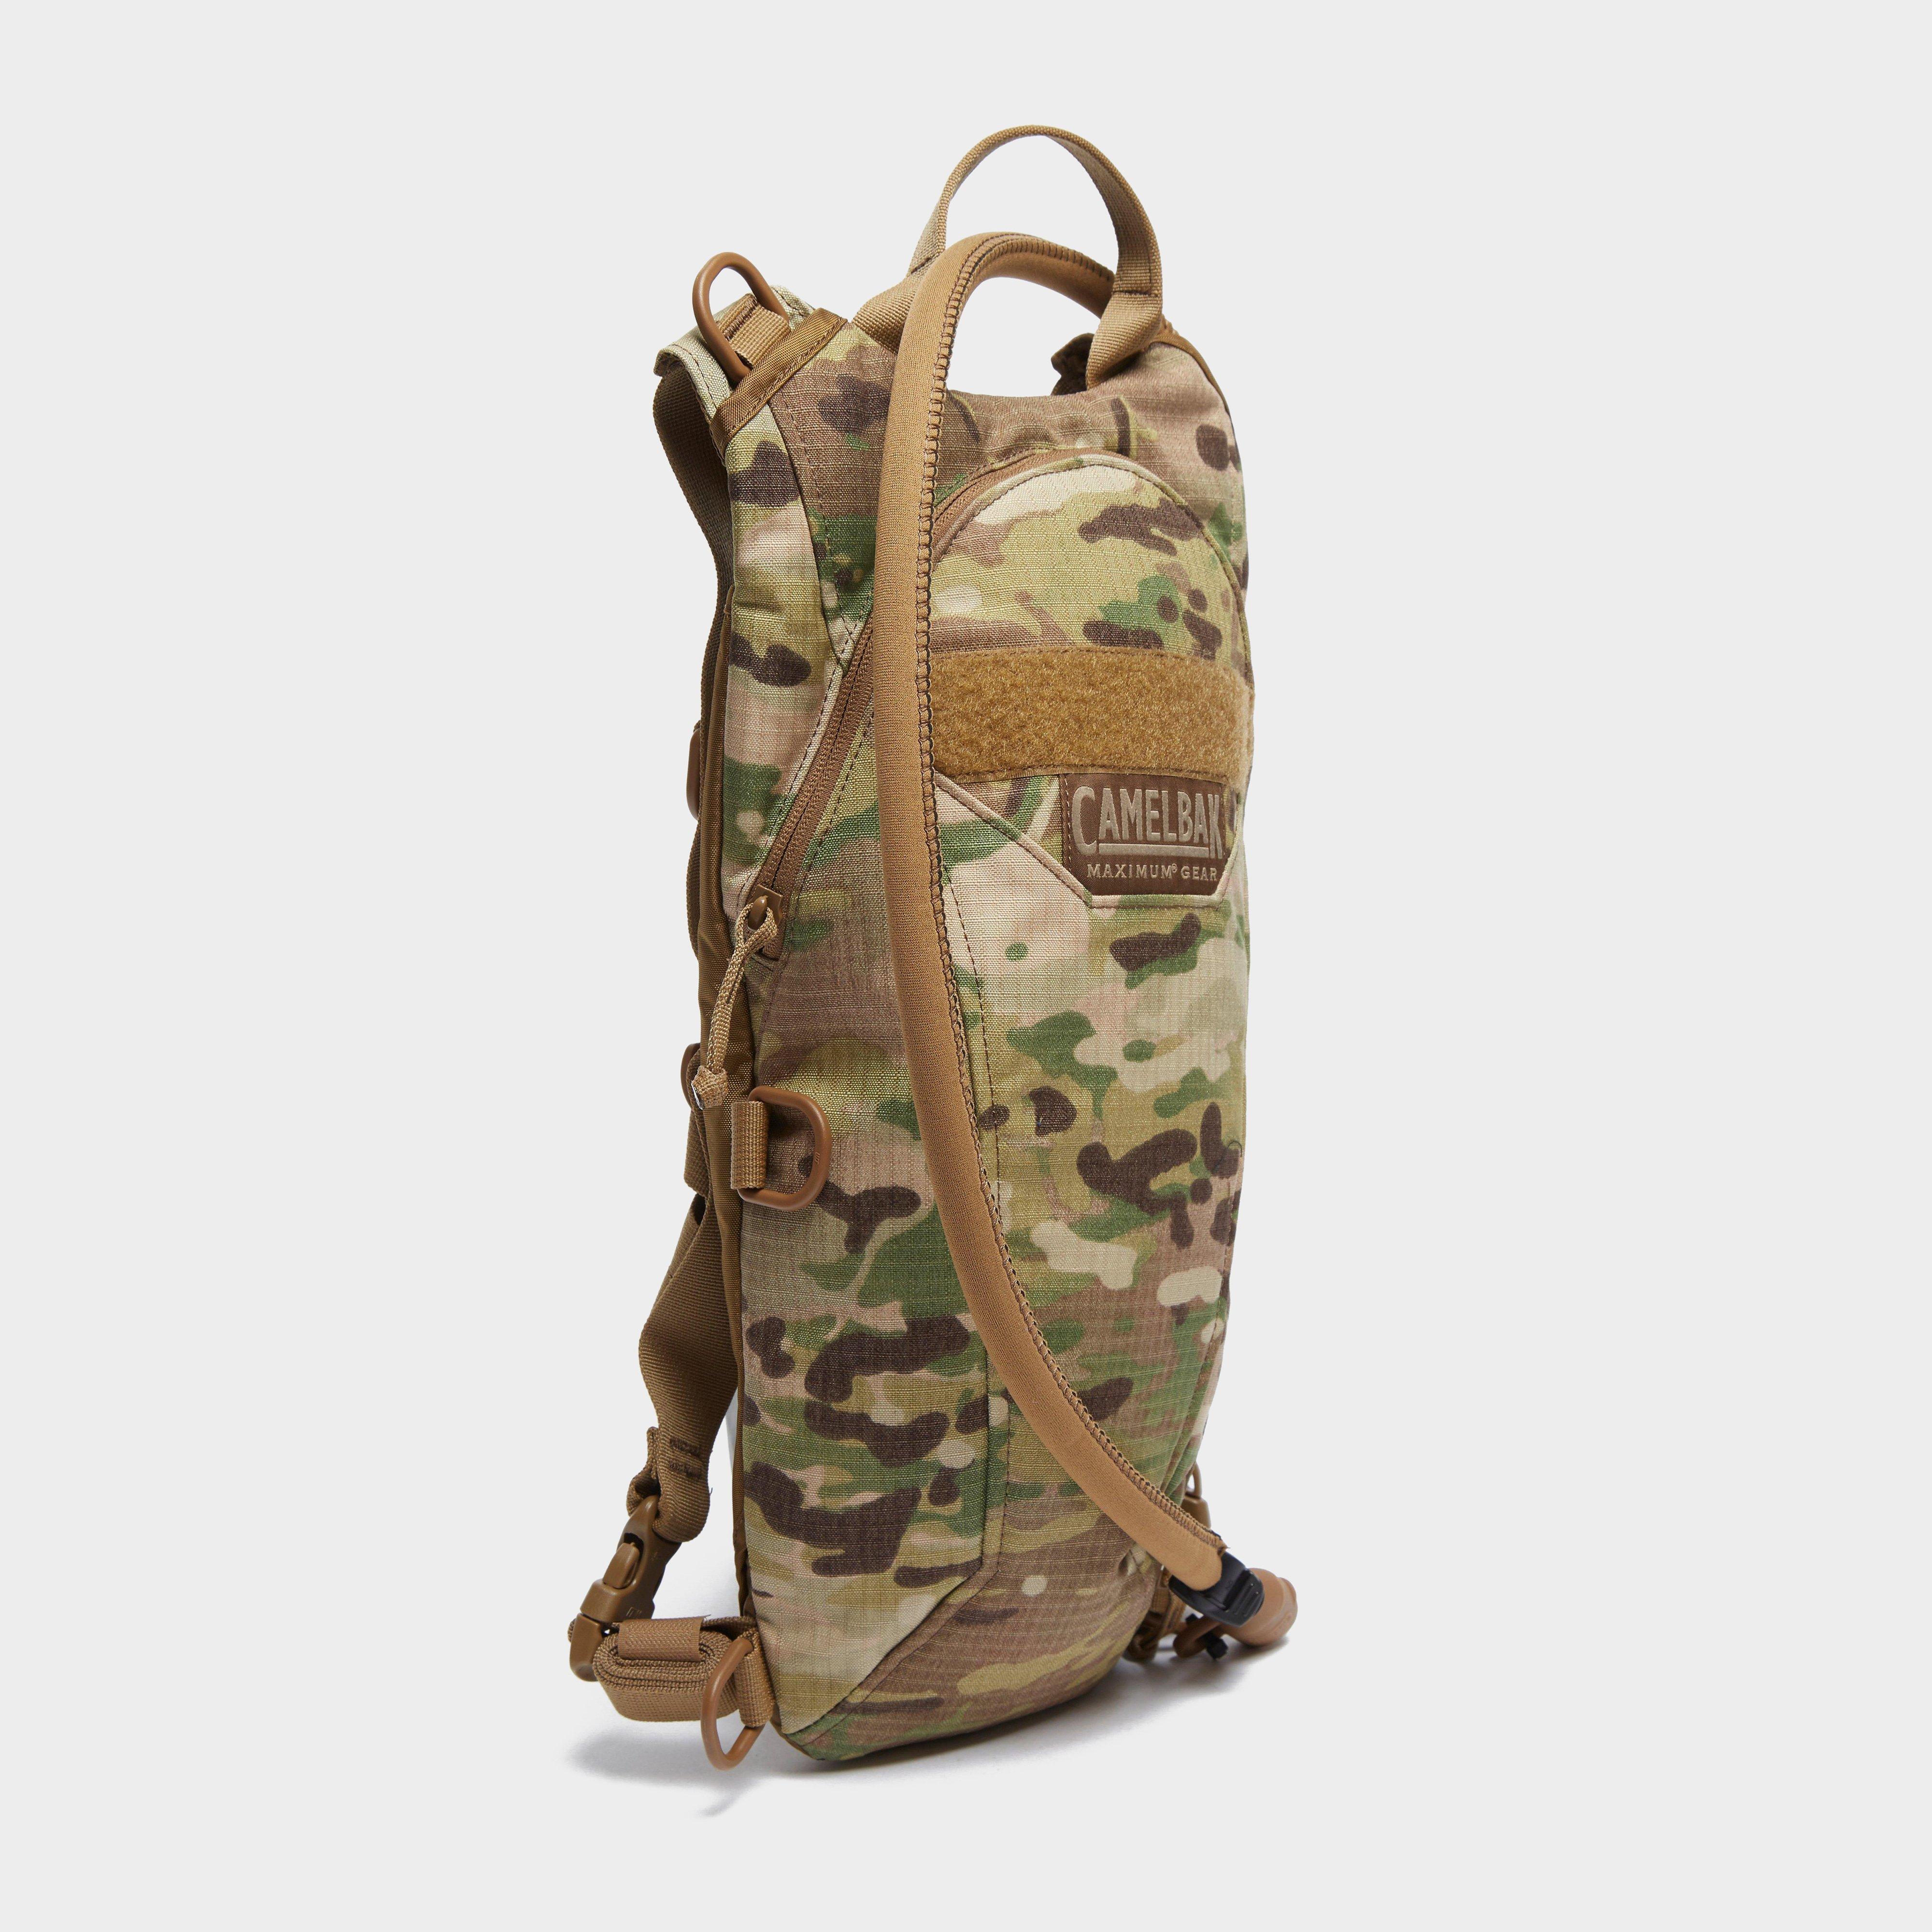  Camelbak Thermobak 3L Military Spec Crux Hydration Pack, Beige